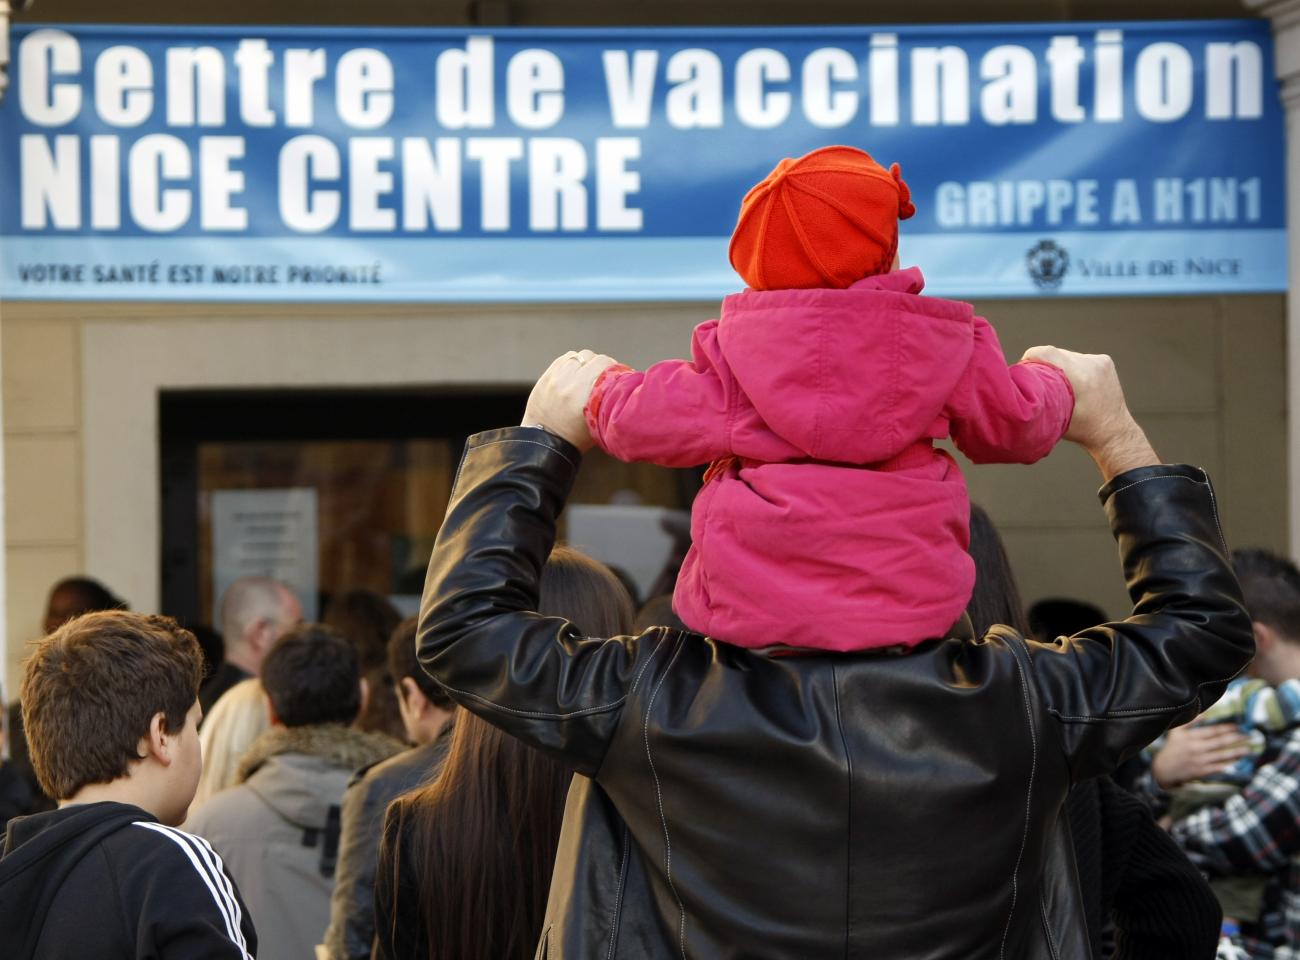 A little girl sits on the shoulders of a man as they stand in front of an H1N1 vaccination center in Nice, France, in 2009.